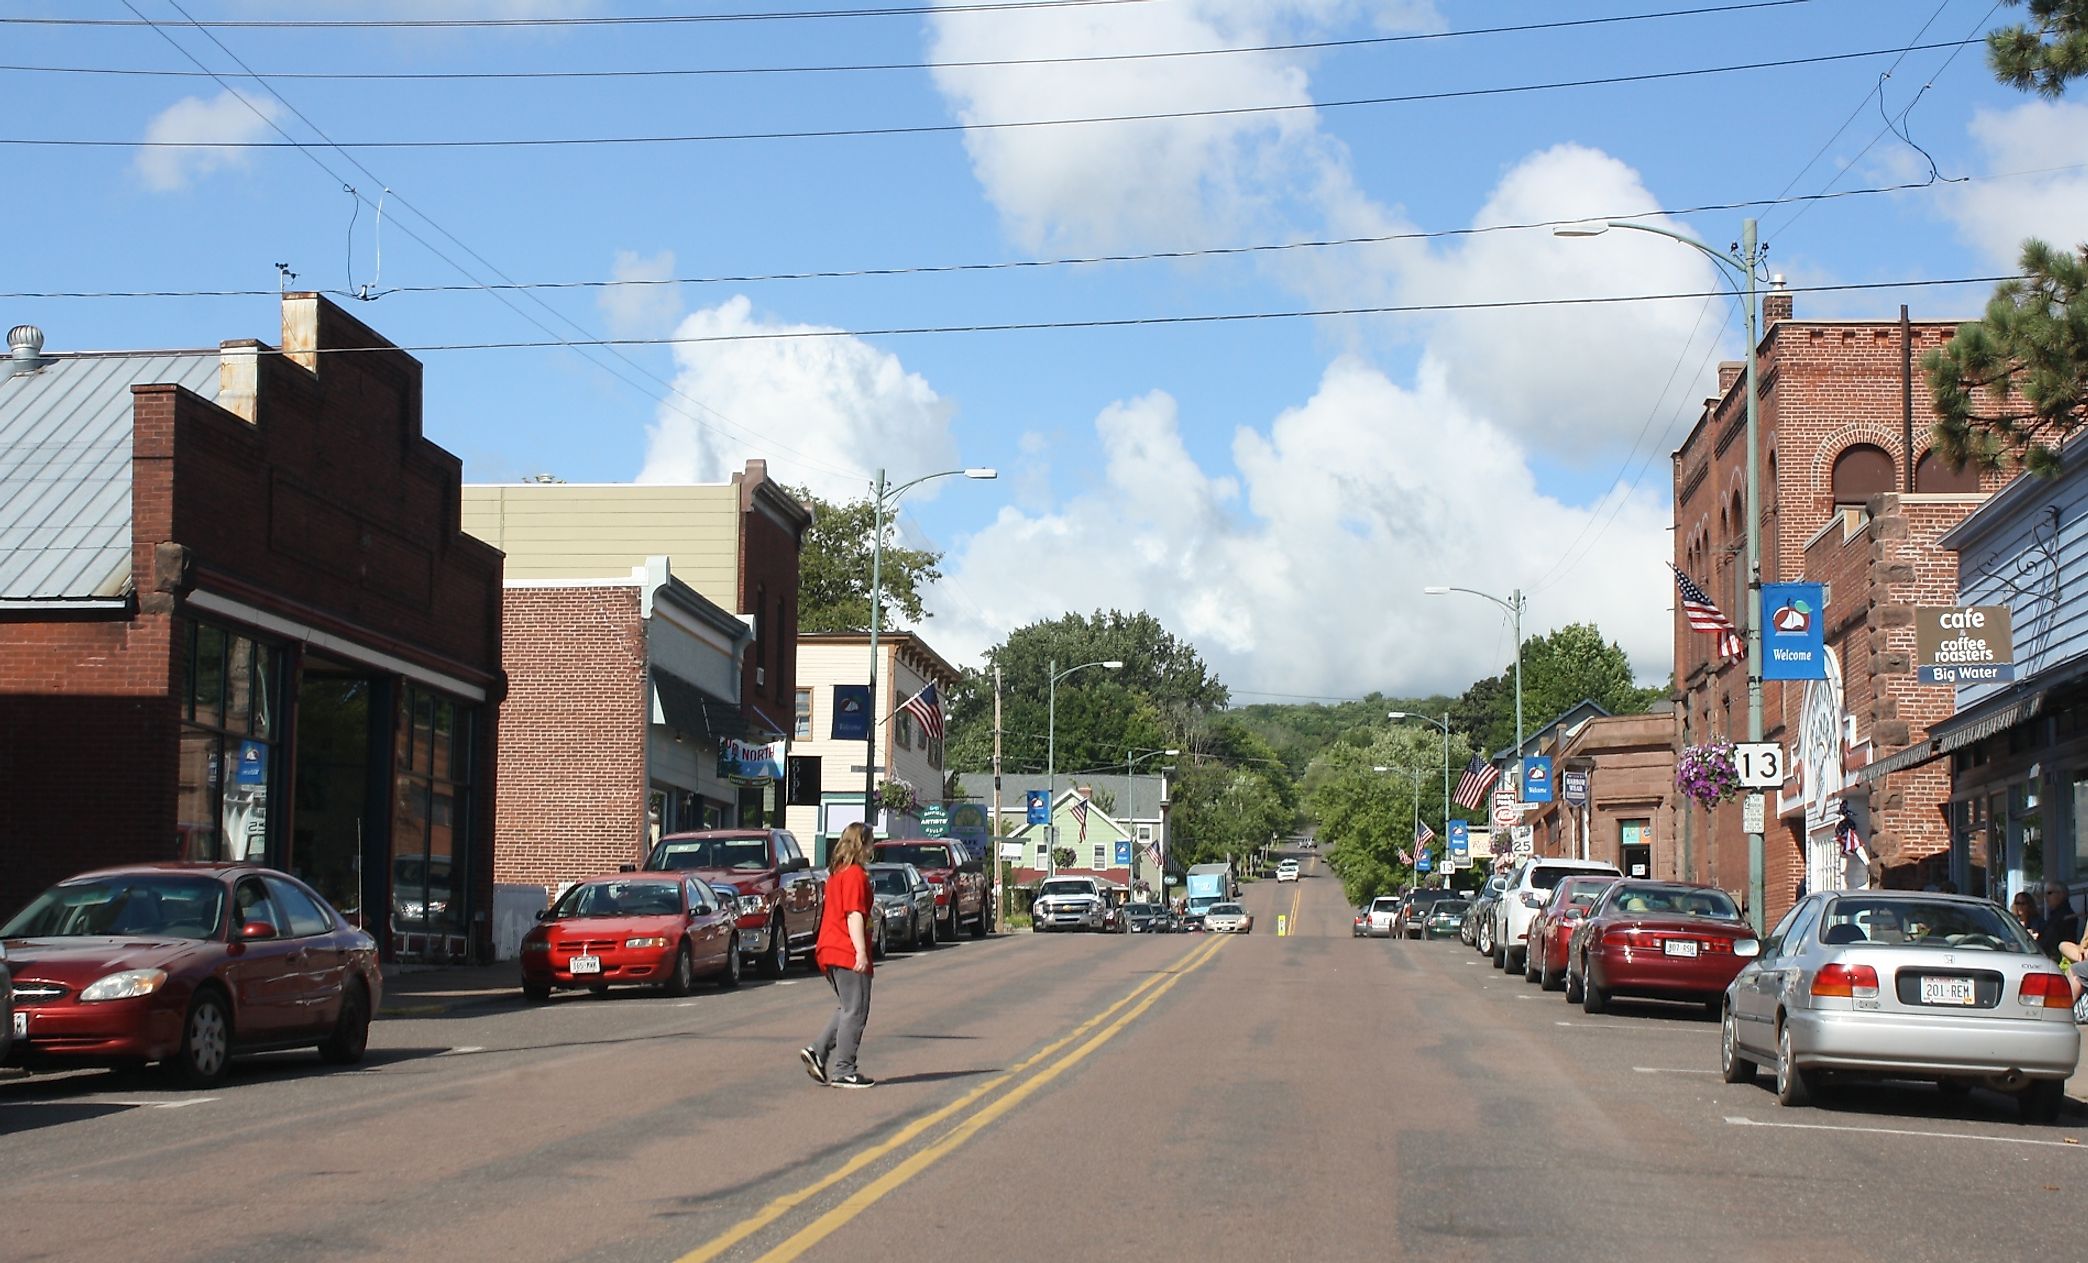 Downtown Bayfield in Wisconsin